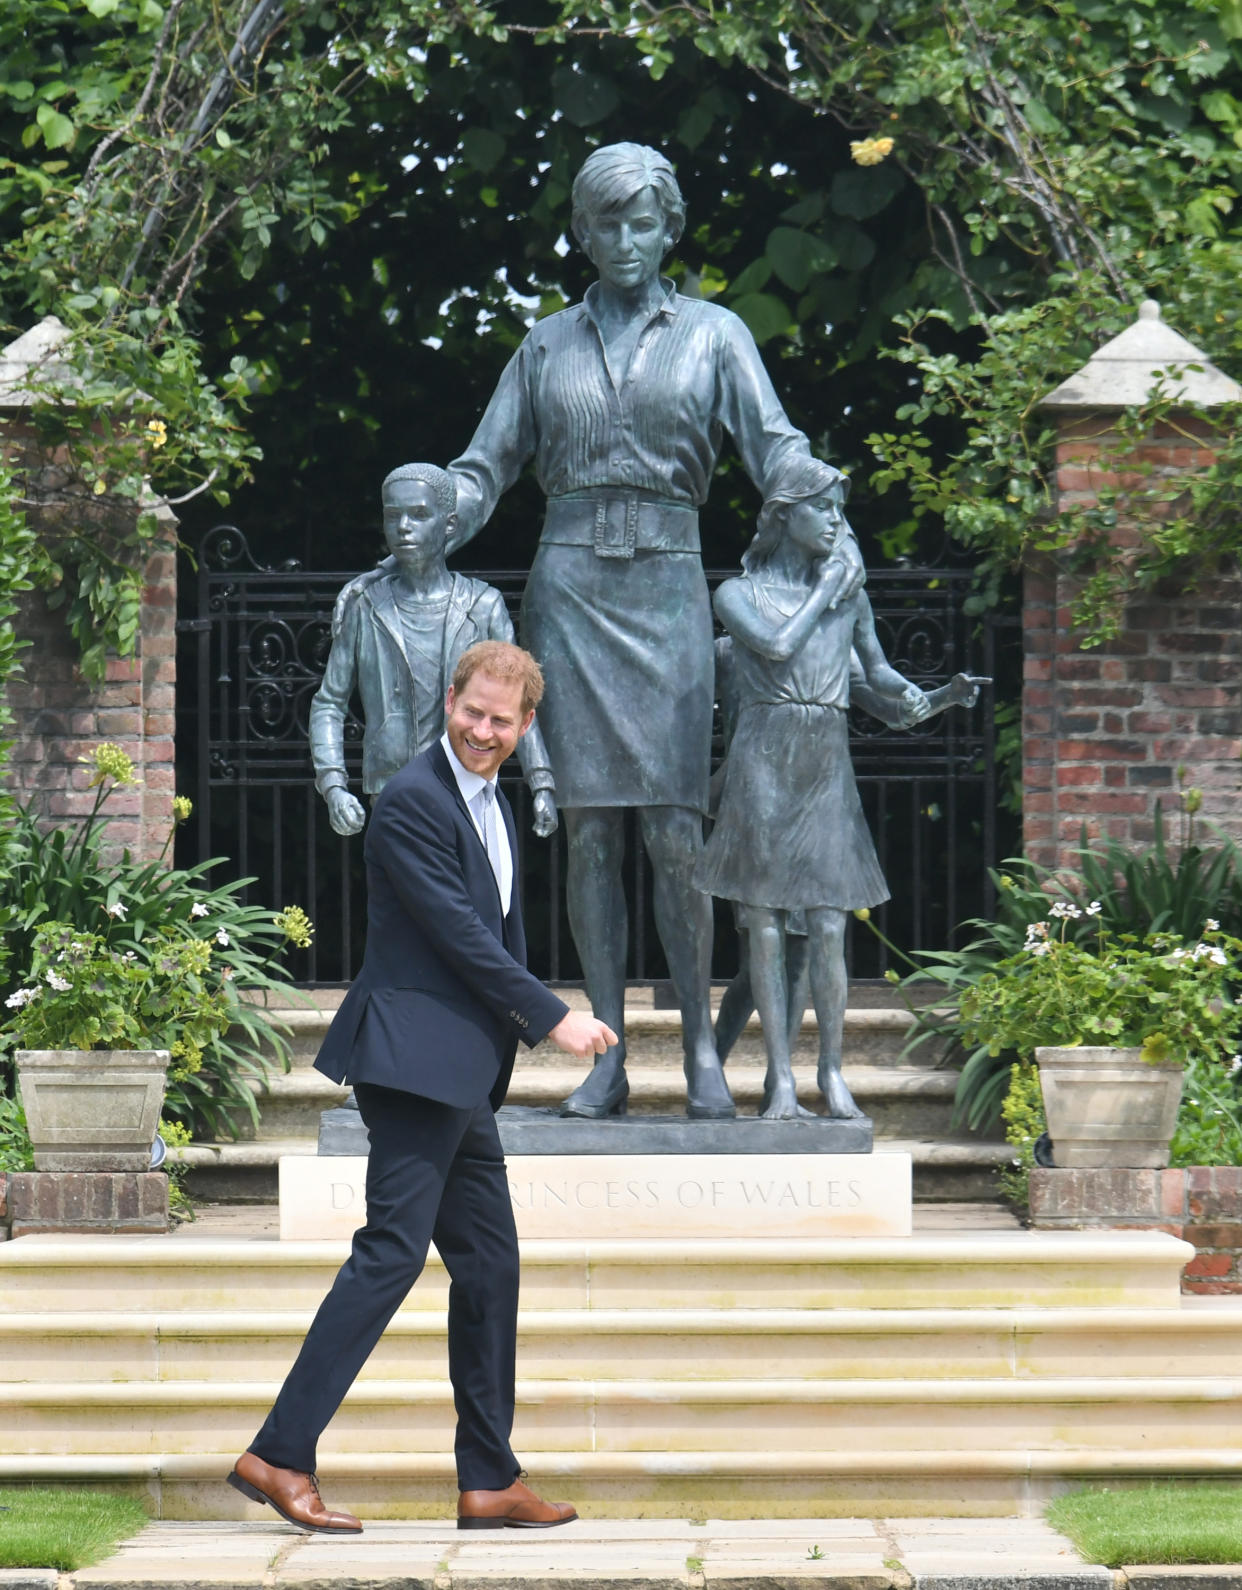 The Duke of Sussex after the unveiling a statue commissioned of his mother Diana, Princess of Wales, in the Sunken Garden at Kensington Palace, London, on what would have been her 60th birthday. Picture date: Thursday July 1, 2021.